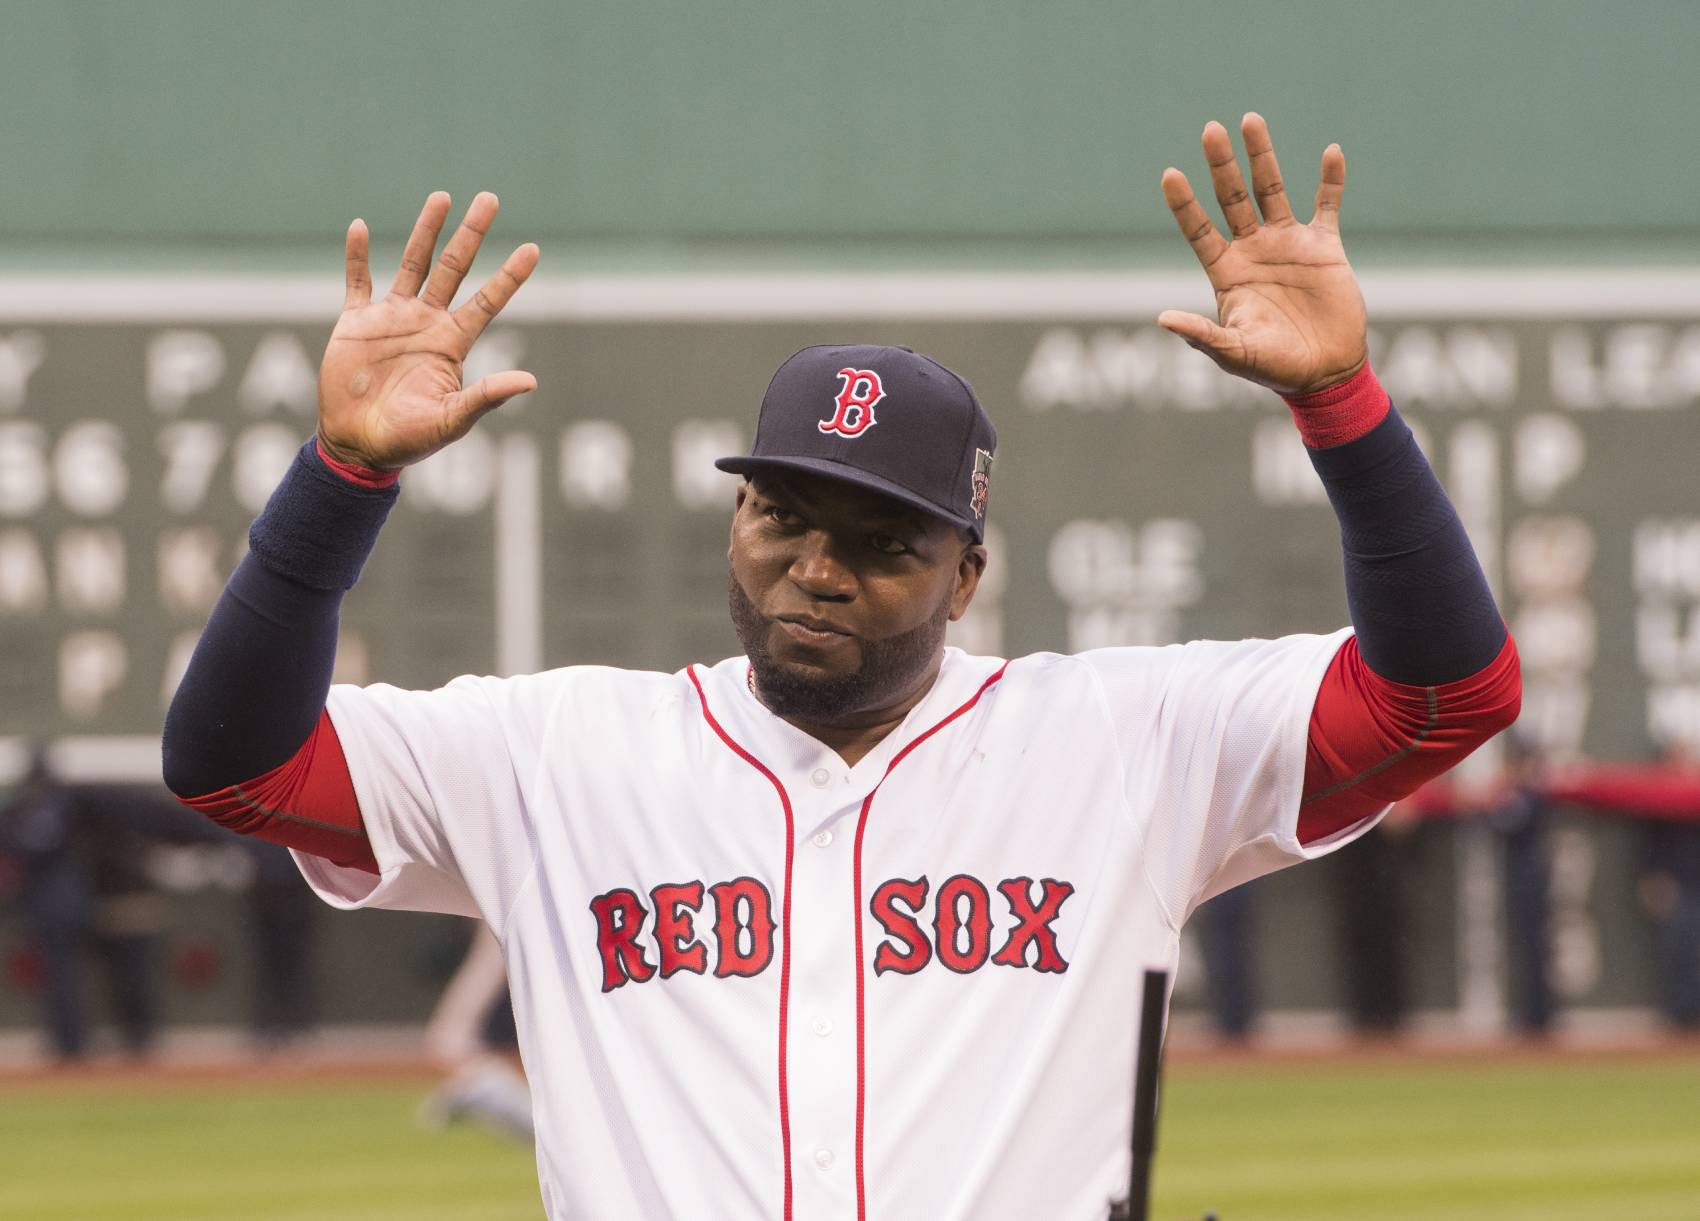 Former Boston Red Sox star David Ortiz never hit three home runs in one game ... but this pitcher did.